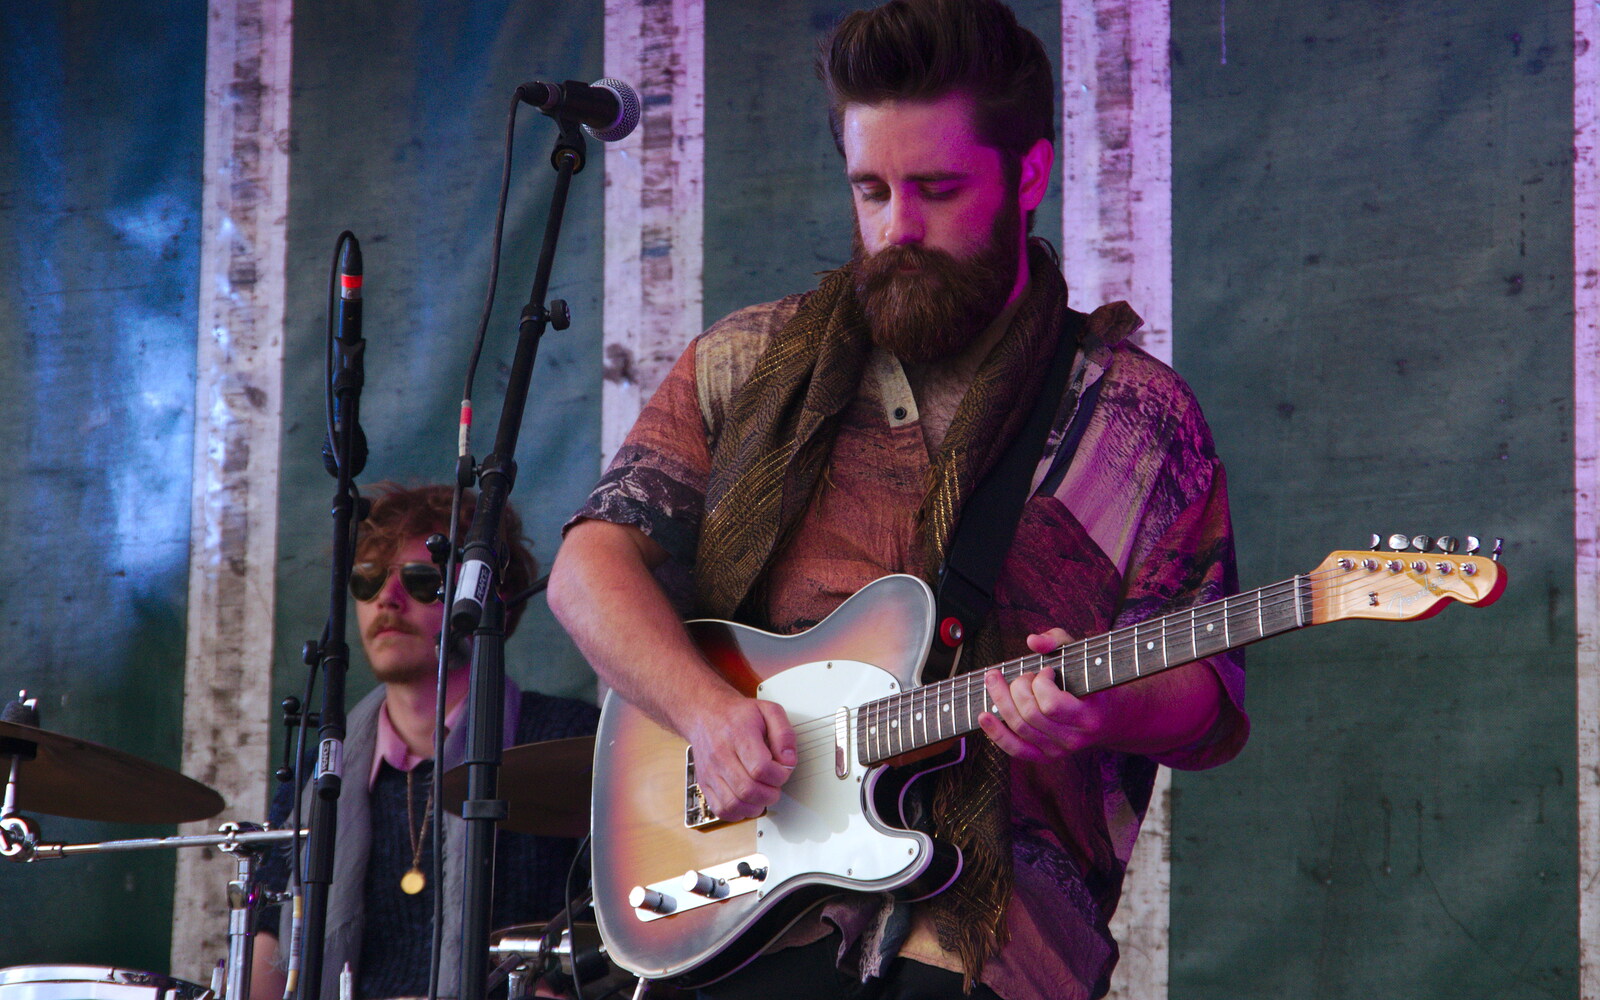 Hirsute guitar action from Waxham Sands and the Nelson Head Beer Festival, Horsey, Norfolk - 31st August 2019